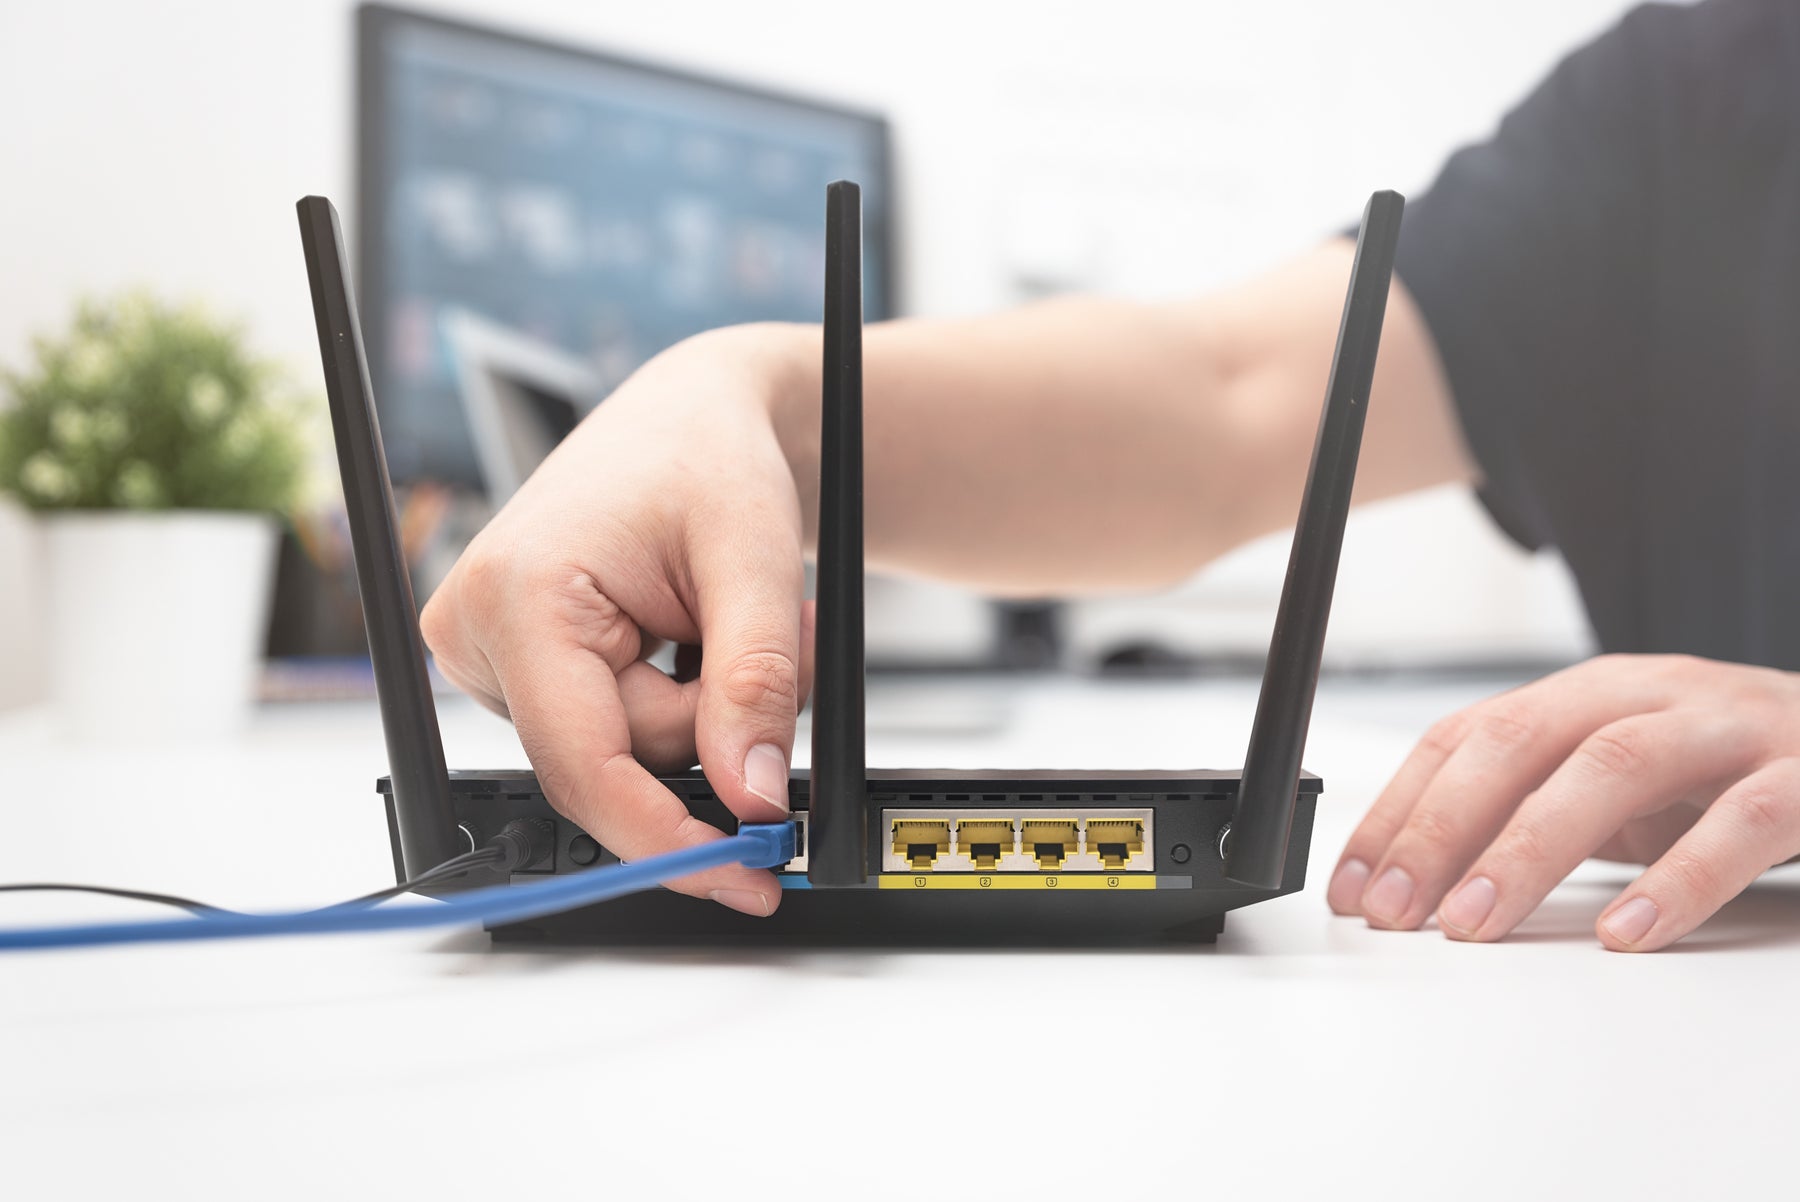 How to Choose the Right Router for Your Home Network